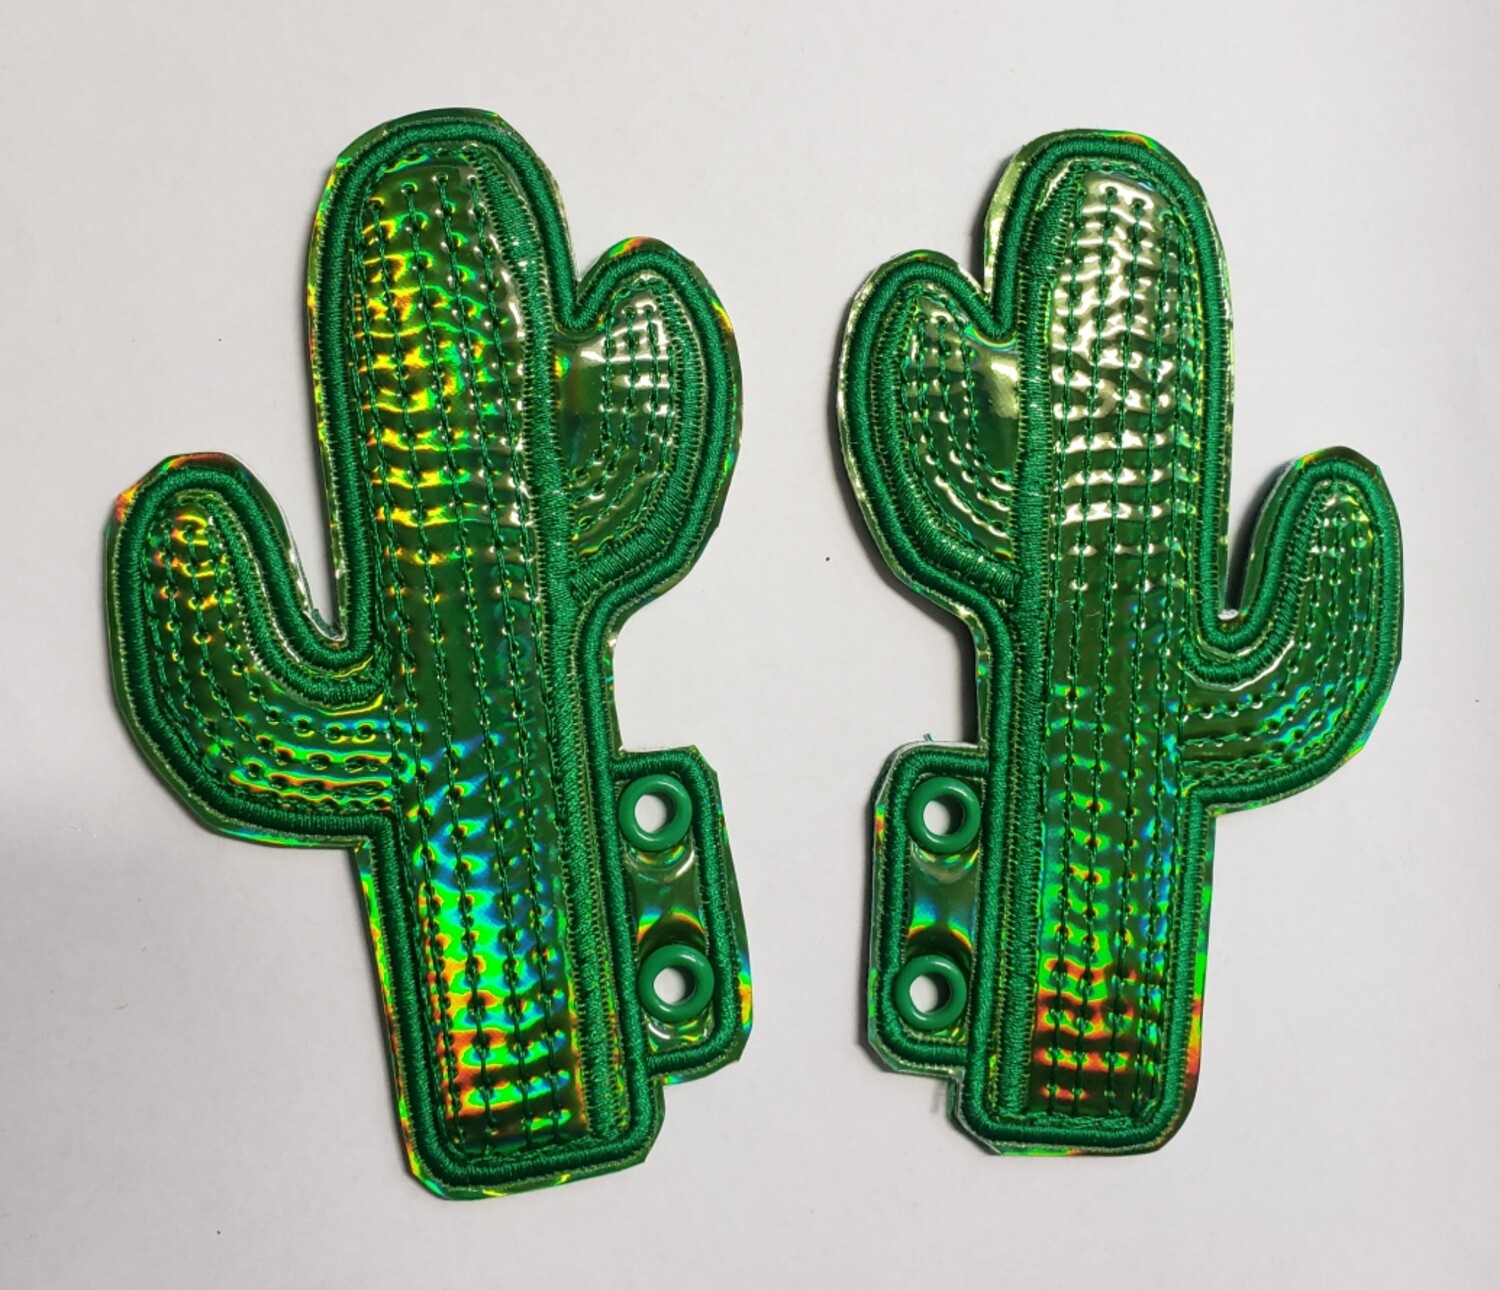 Cactus skate wings in green holographic fabric rts